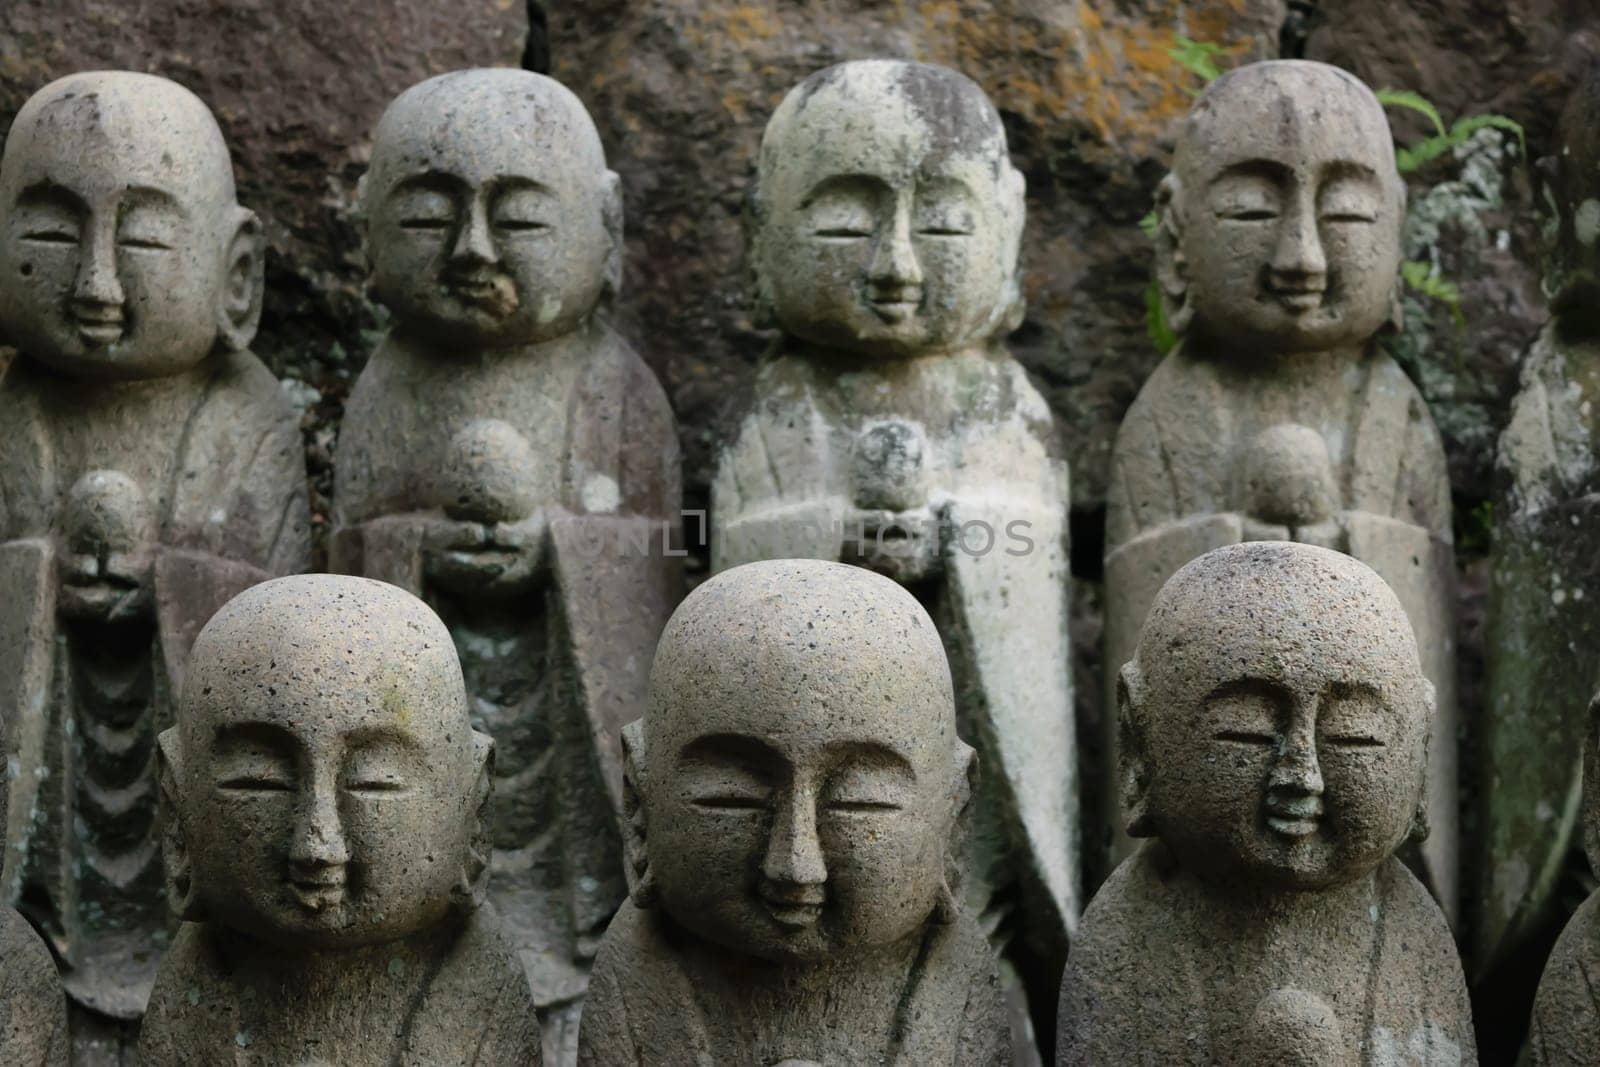 A close-up of multiple stone Buddha statues arranged in rows, with moss and weathering visible on some of them. The statues have serene expressions and are set against a rocky background.